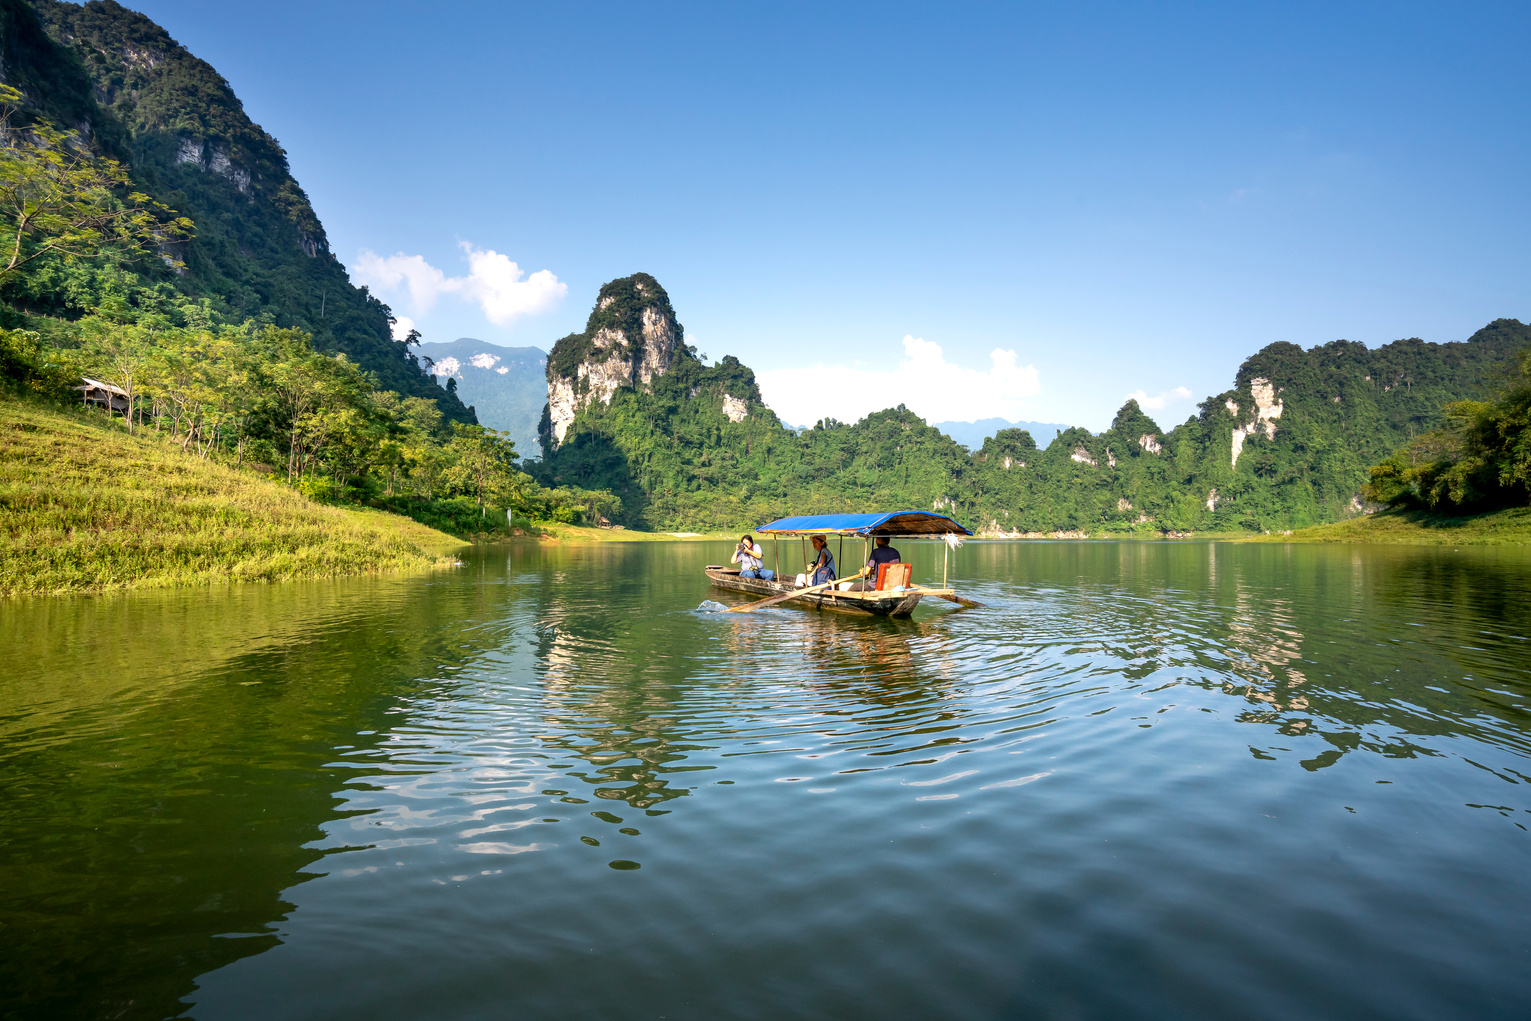 Anonymous travelers in boat sailing on river against green mountains